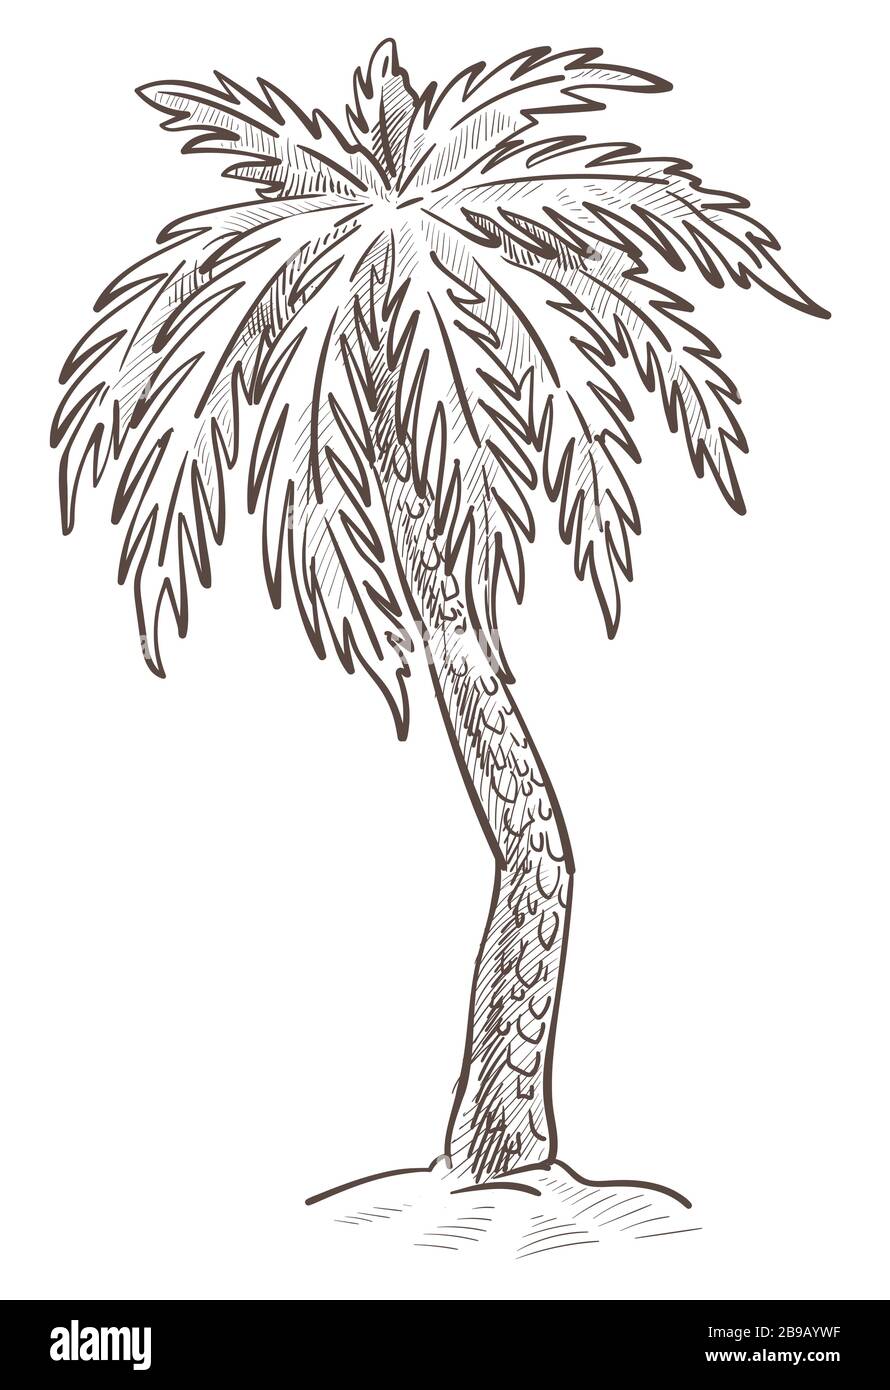 palm tree Illustrations to Download for Free  FreeImages